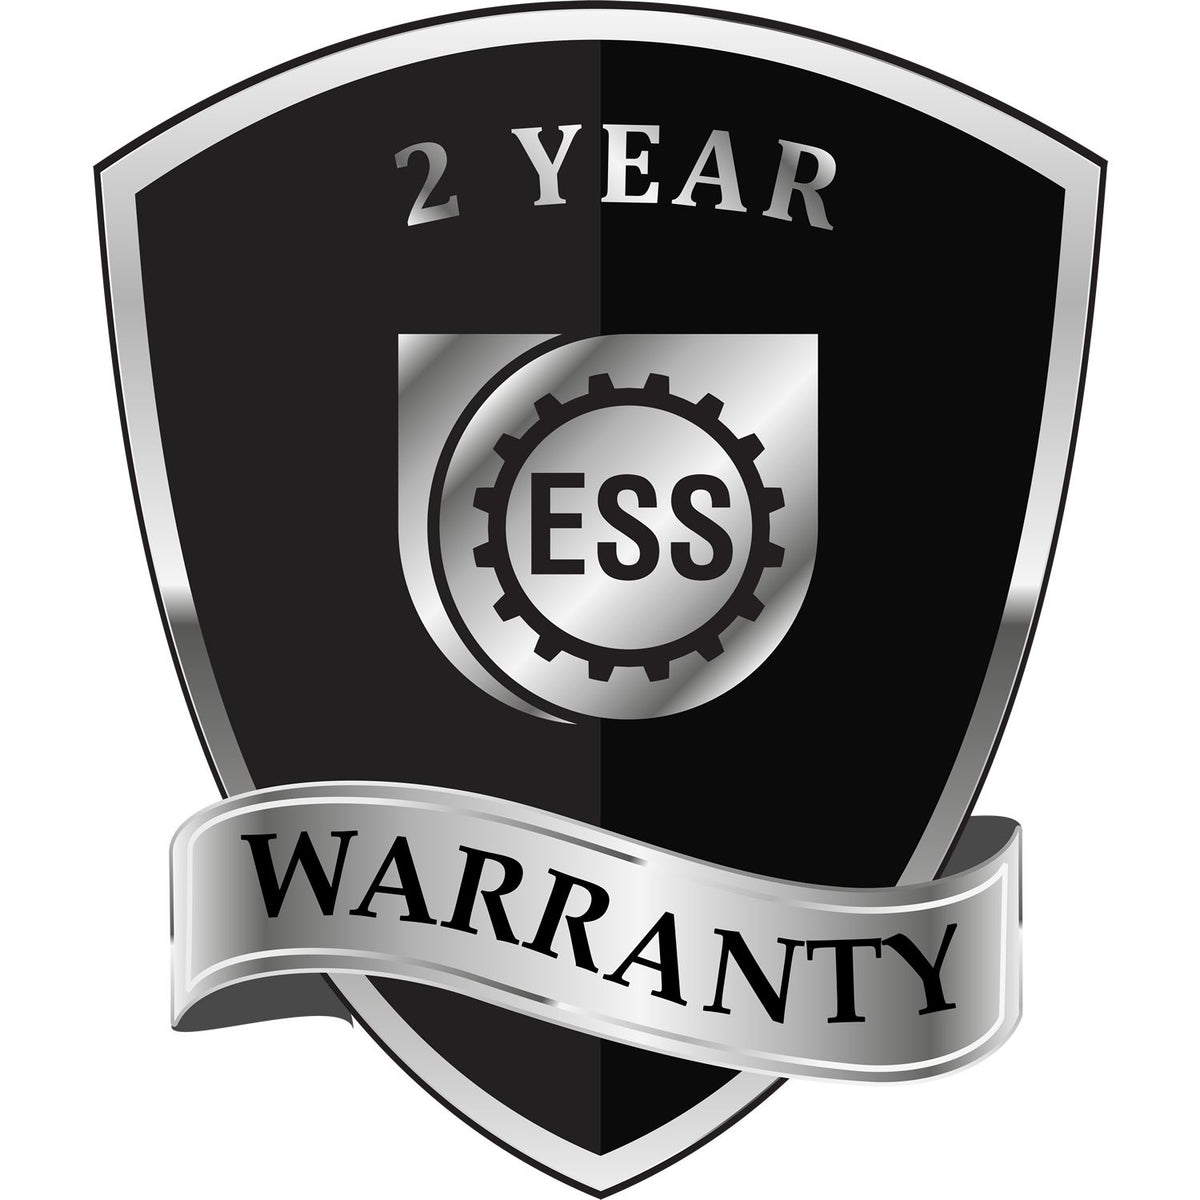 A badge or emblem showing a warranty icon for the Heavy Duty Cast Iron Wyoming Engineer Seal Embosser